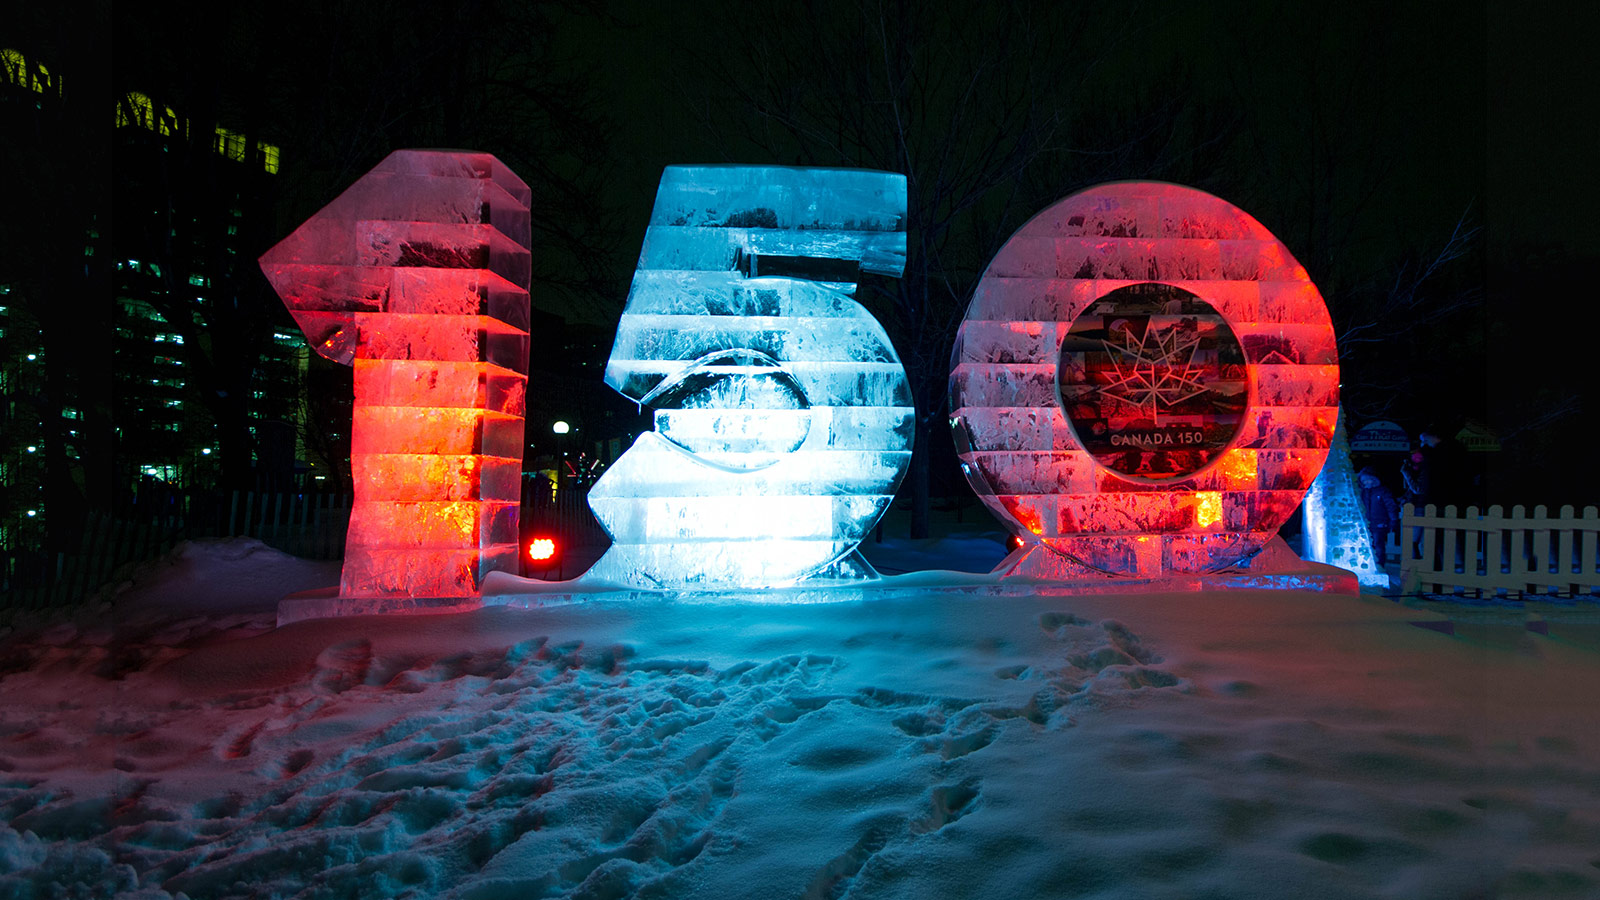 Ice sculpture that reads 150 illuminated in red and white